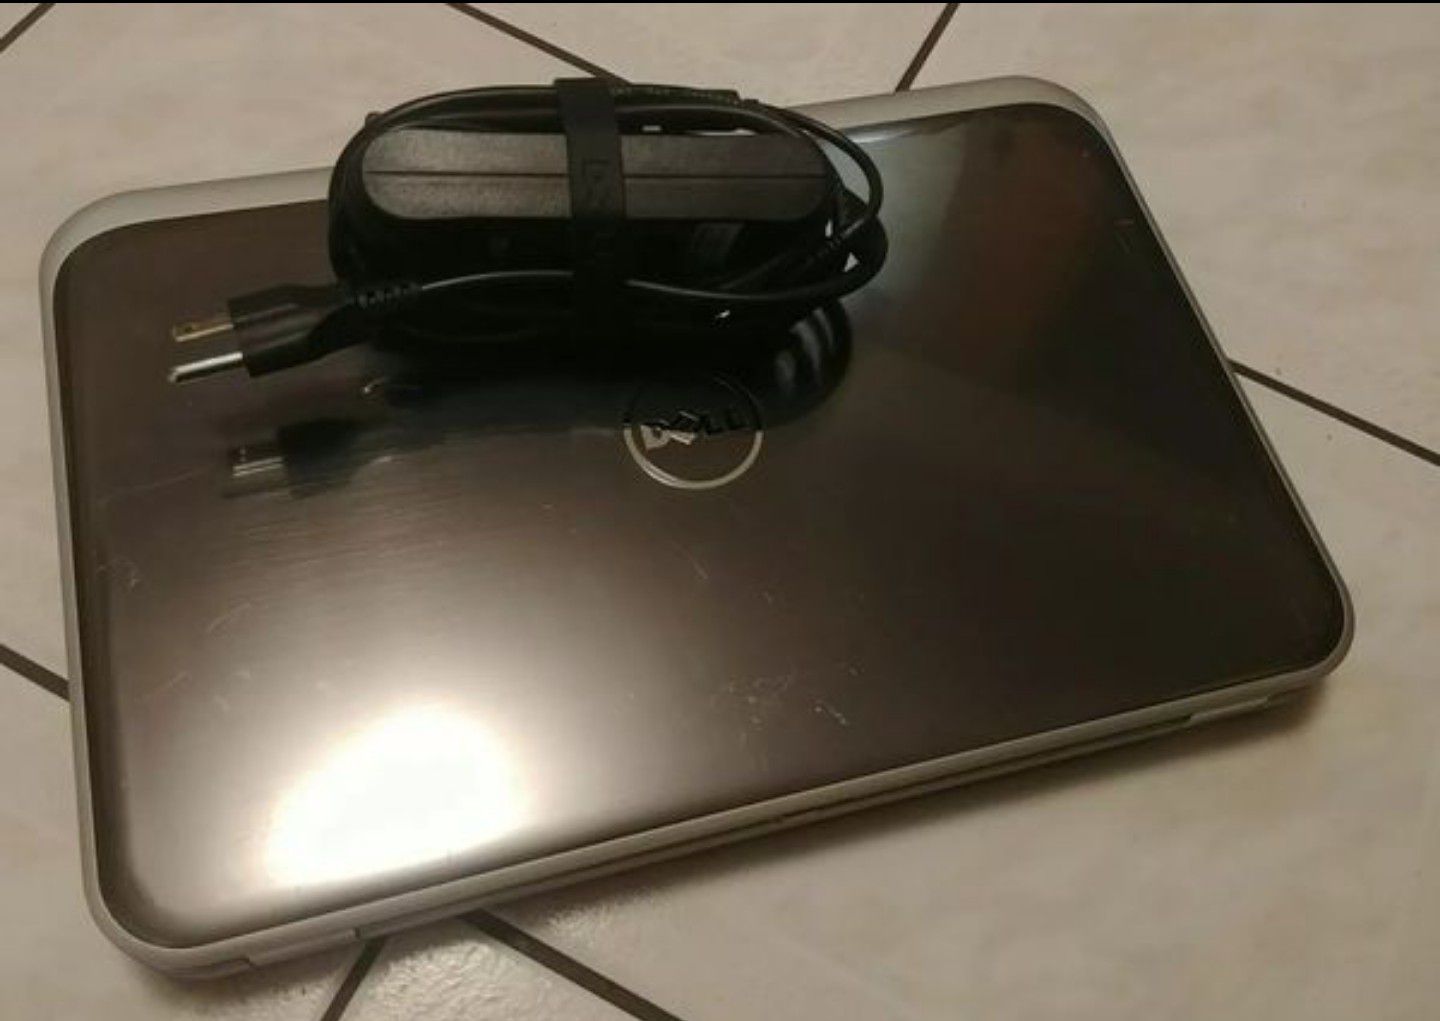 LIKE NEW DELL INSPIRON 5520